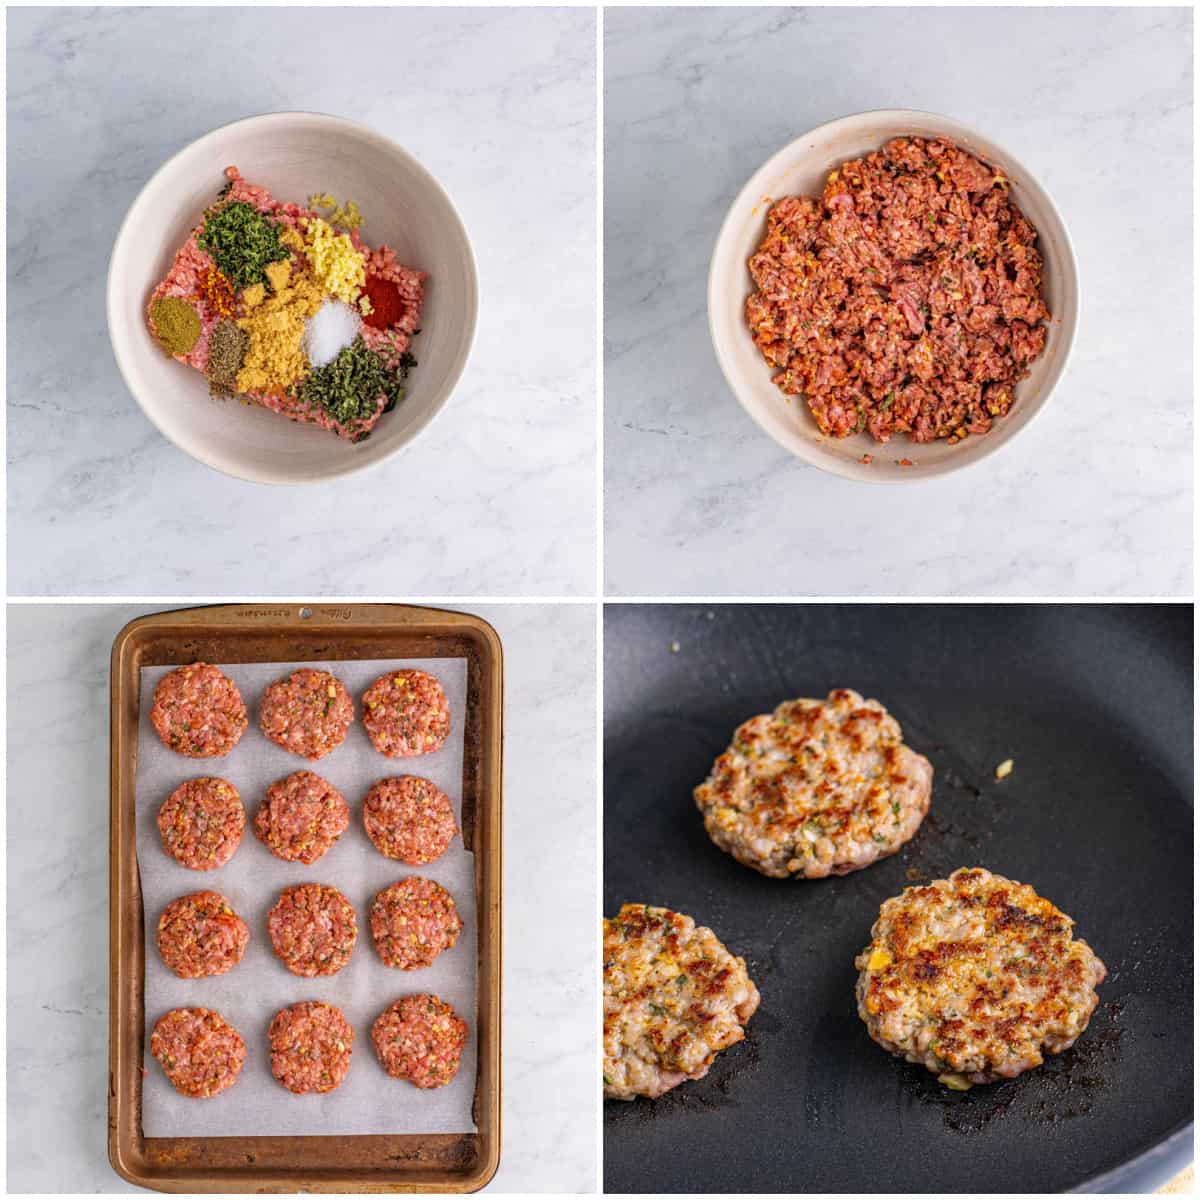 Step by step photos on how to make Homemade Breakfast Sausage.